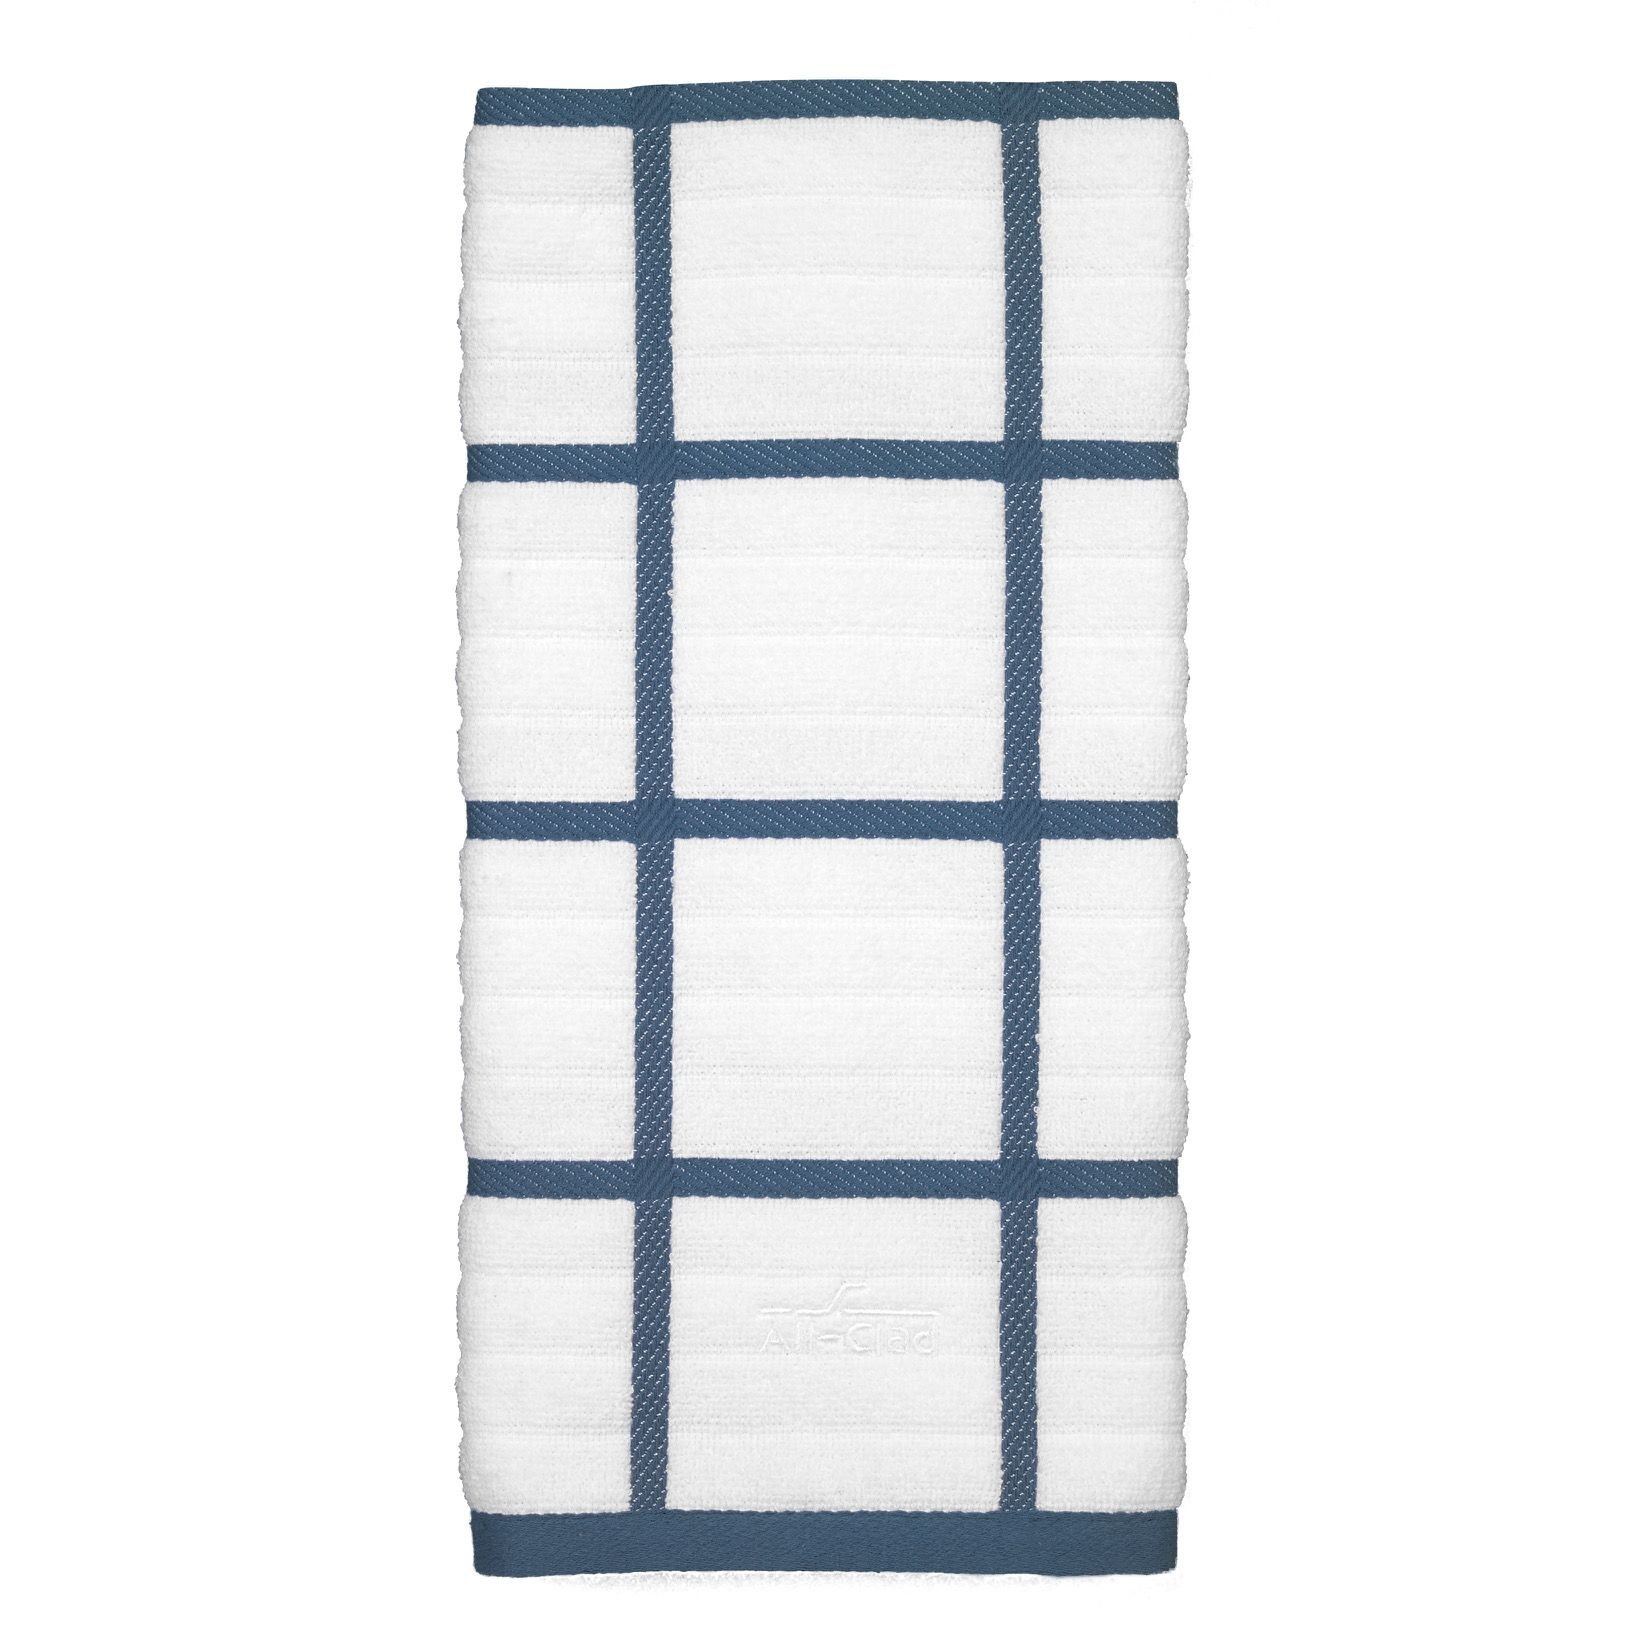 KitchenAid 8-Pack Cotton Solid Any Occasion Kitchen Towel Set